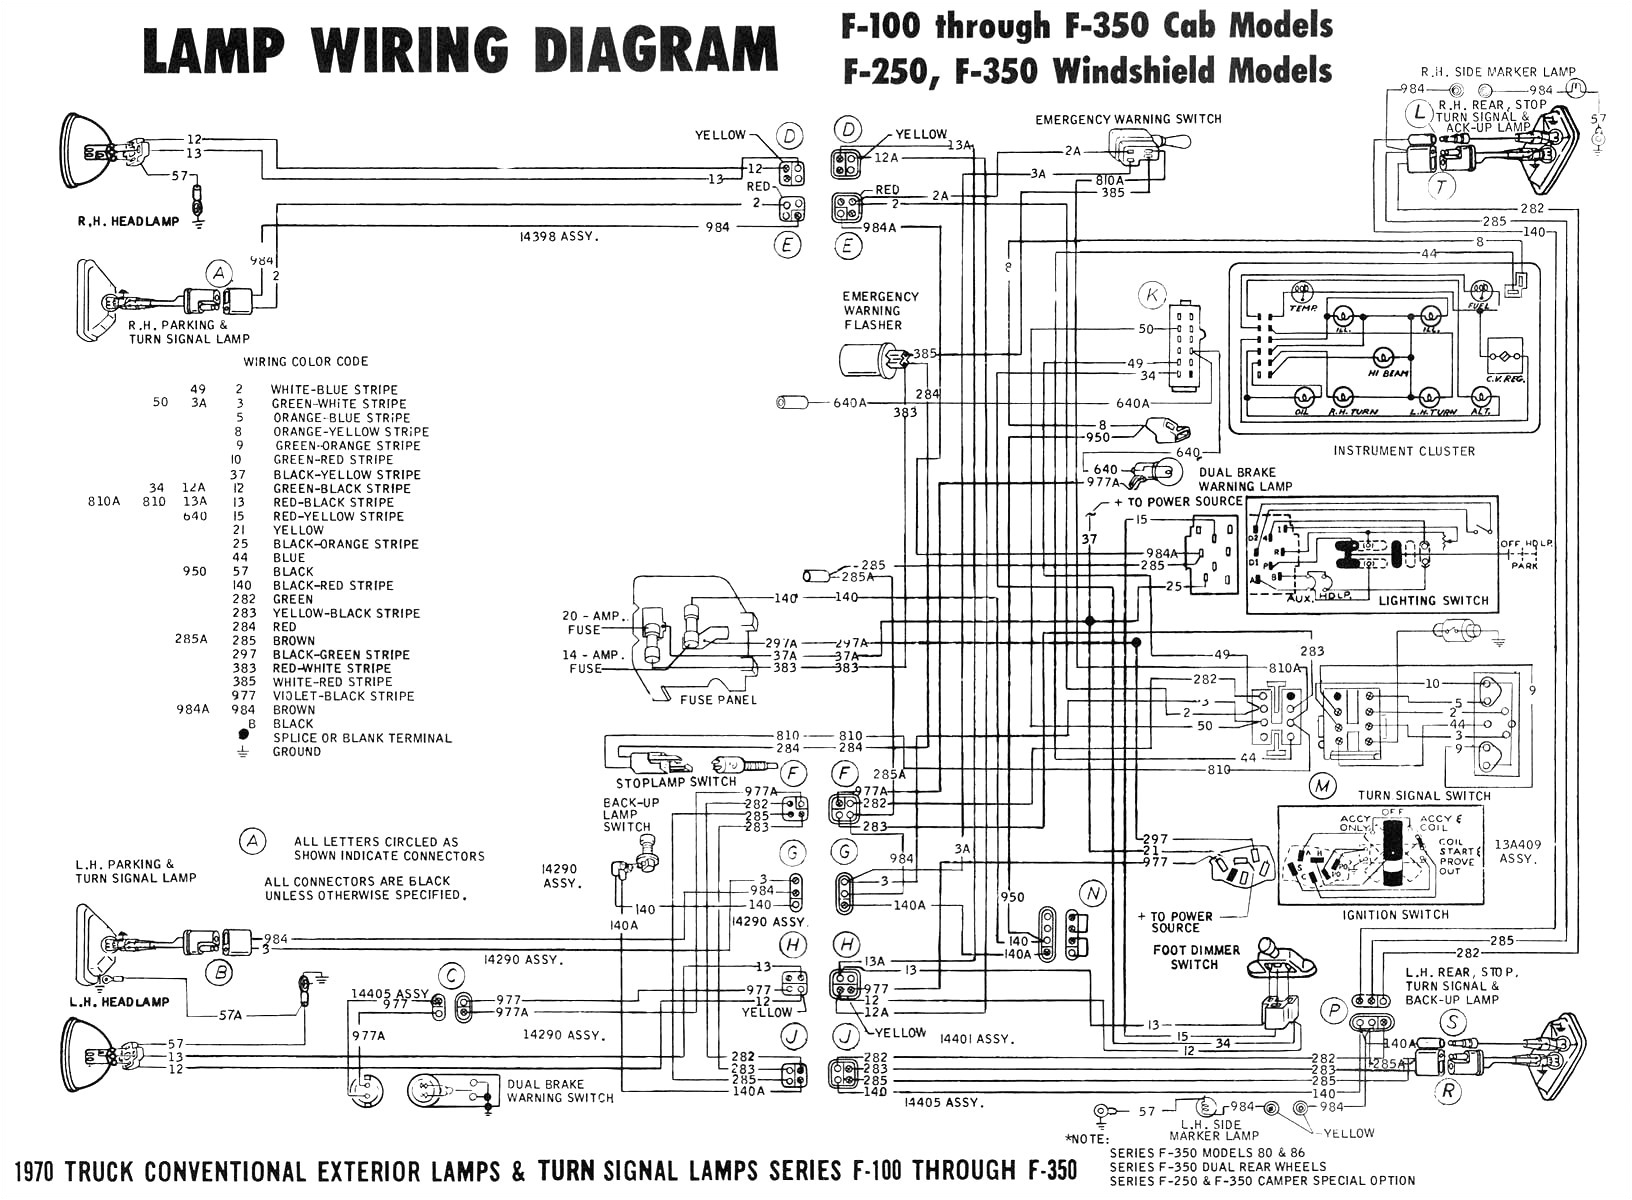 Electrical Wiring Diagrams for Lighting Wiring Diagrams for Lighting Circuits E2 80 93 Junction Box Method